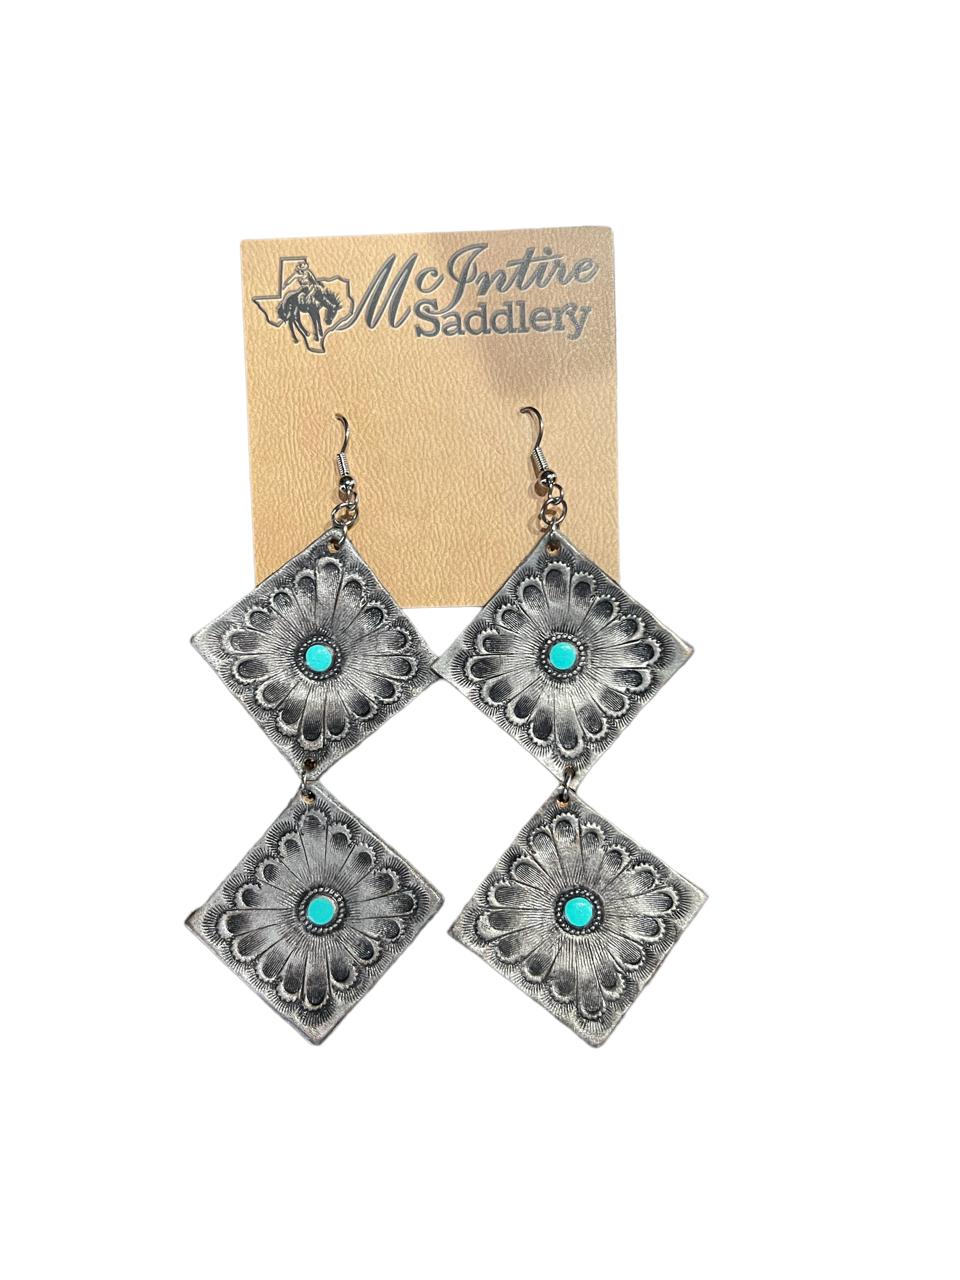 McIntire Saddlery Leather Double Concho Earrings